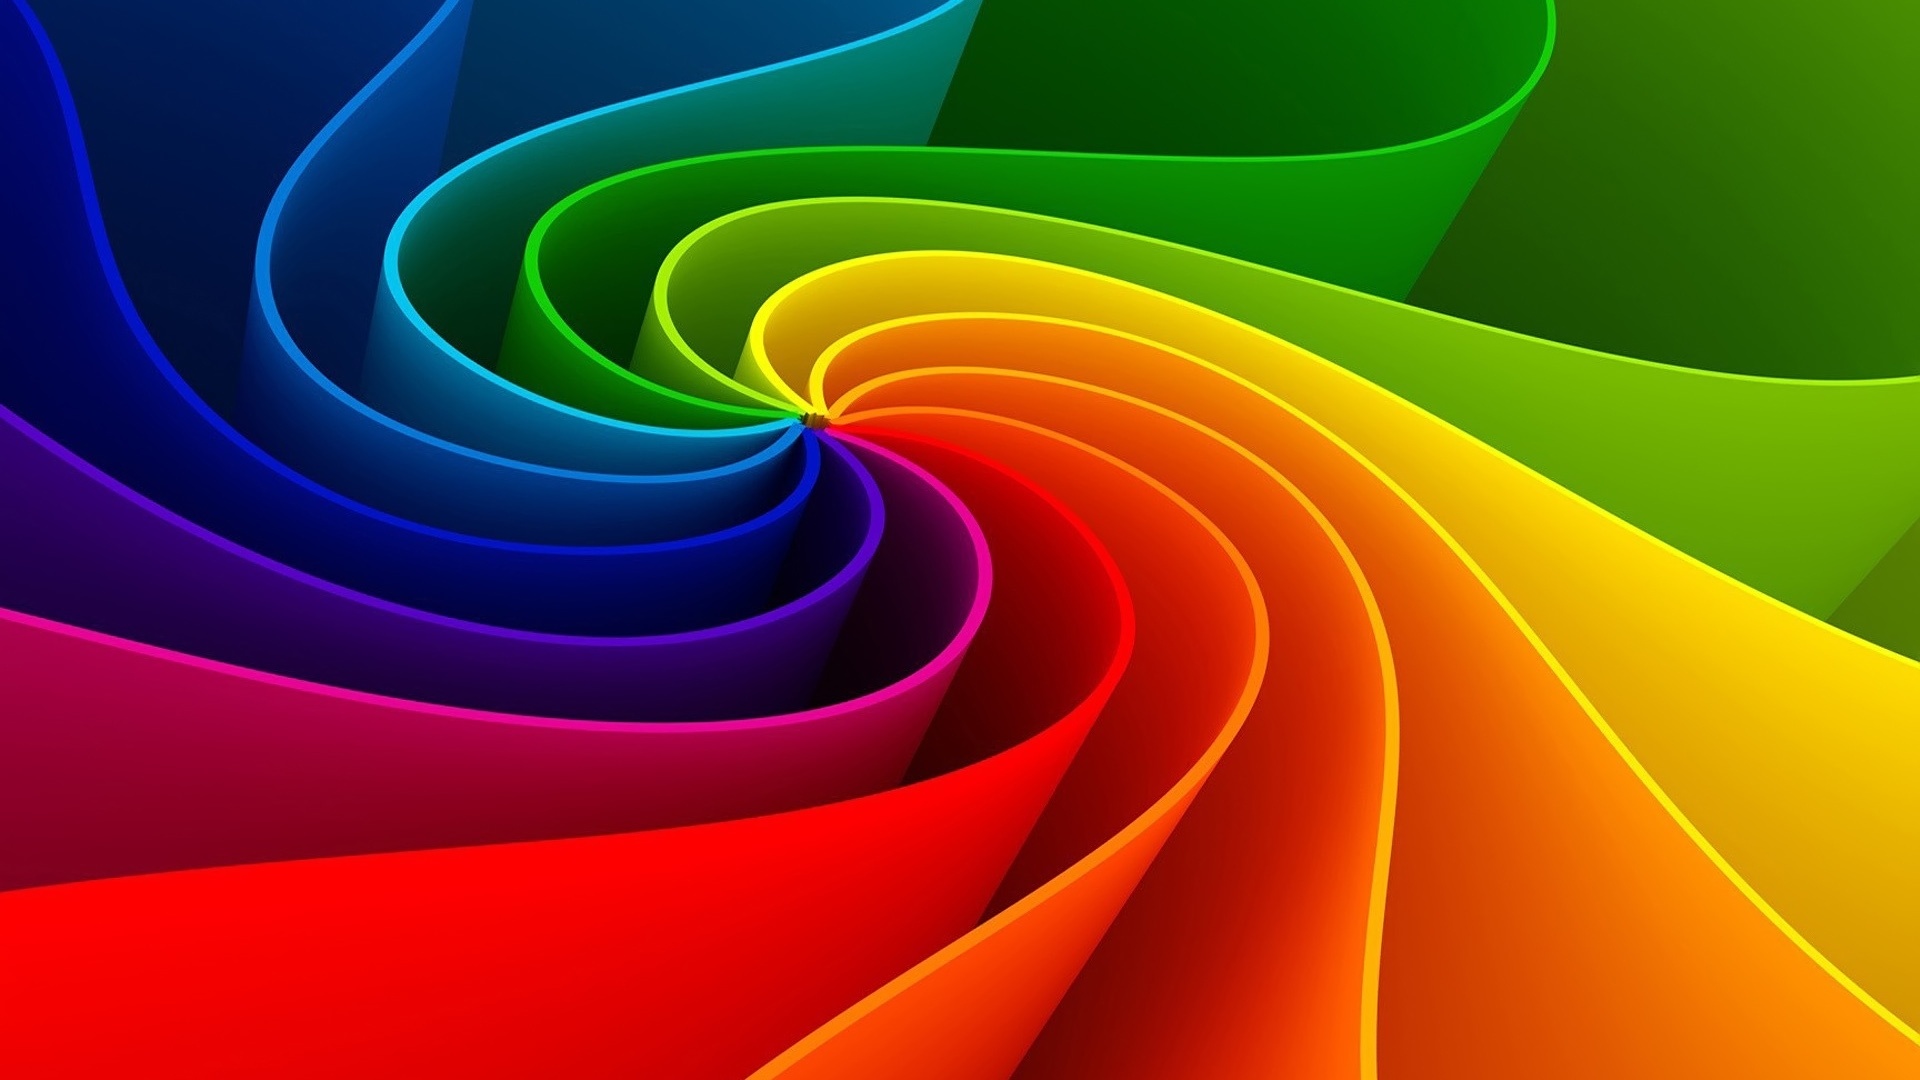 By Stephen Ments Off On Amazing Colorful HD Wallpaper